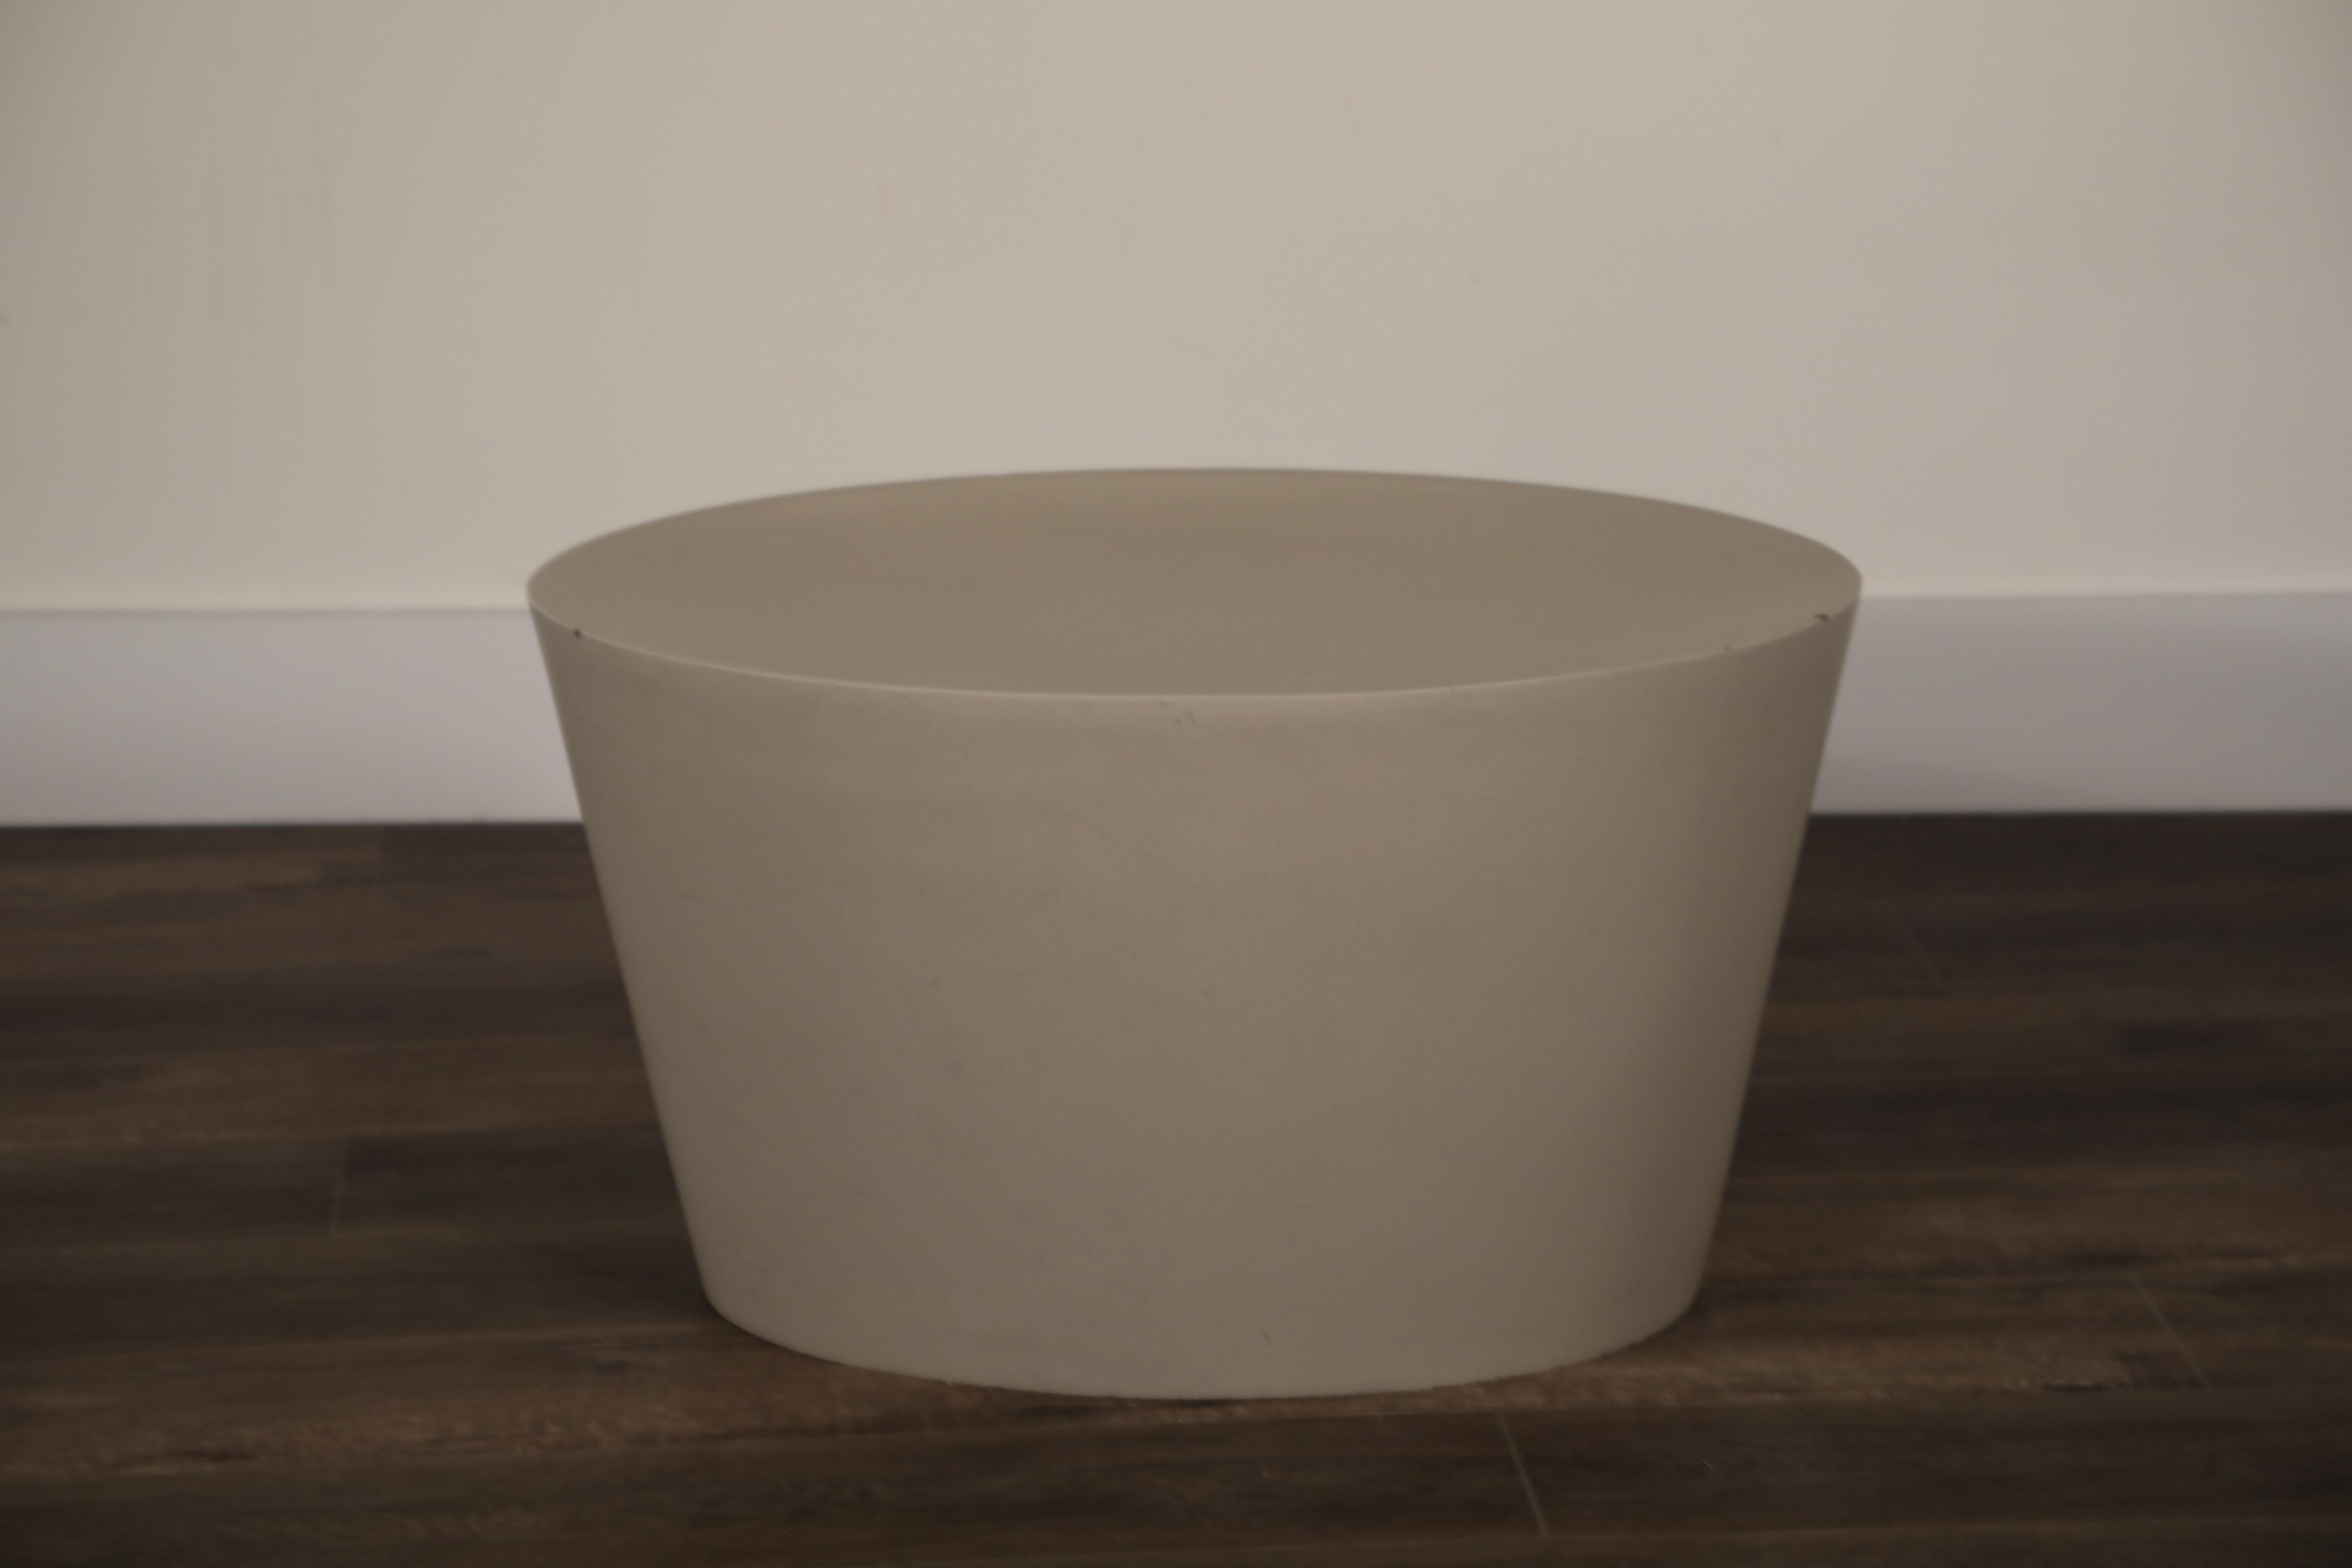 Maya Lin 1st-Generation Concrete Stool for Knoll Studio, Signed and Stamped 1998 4